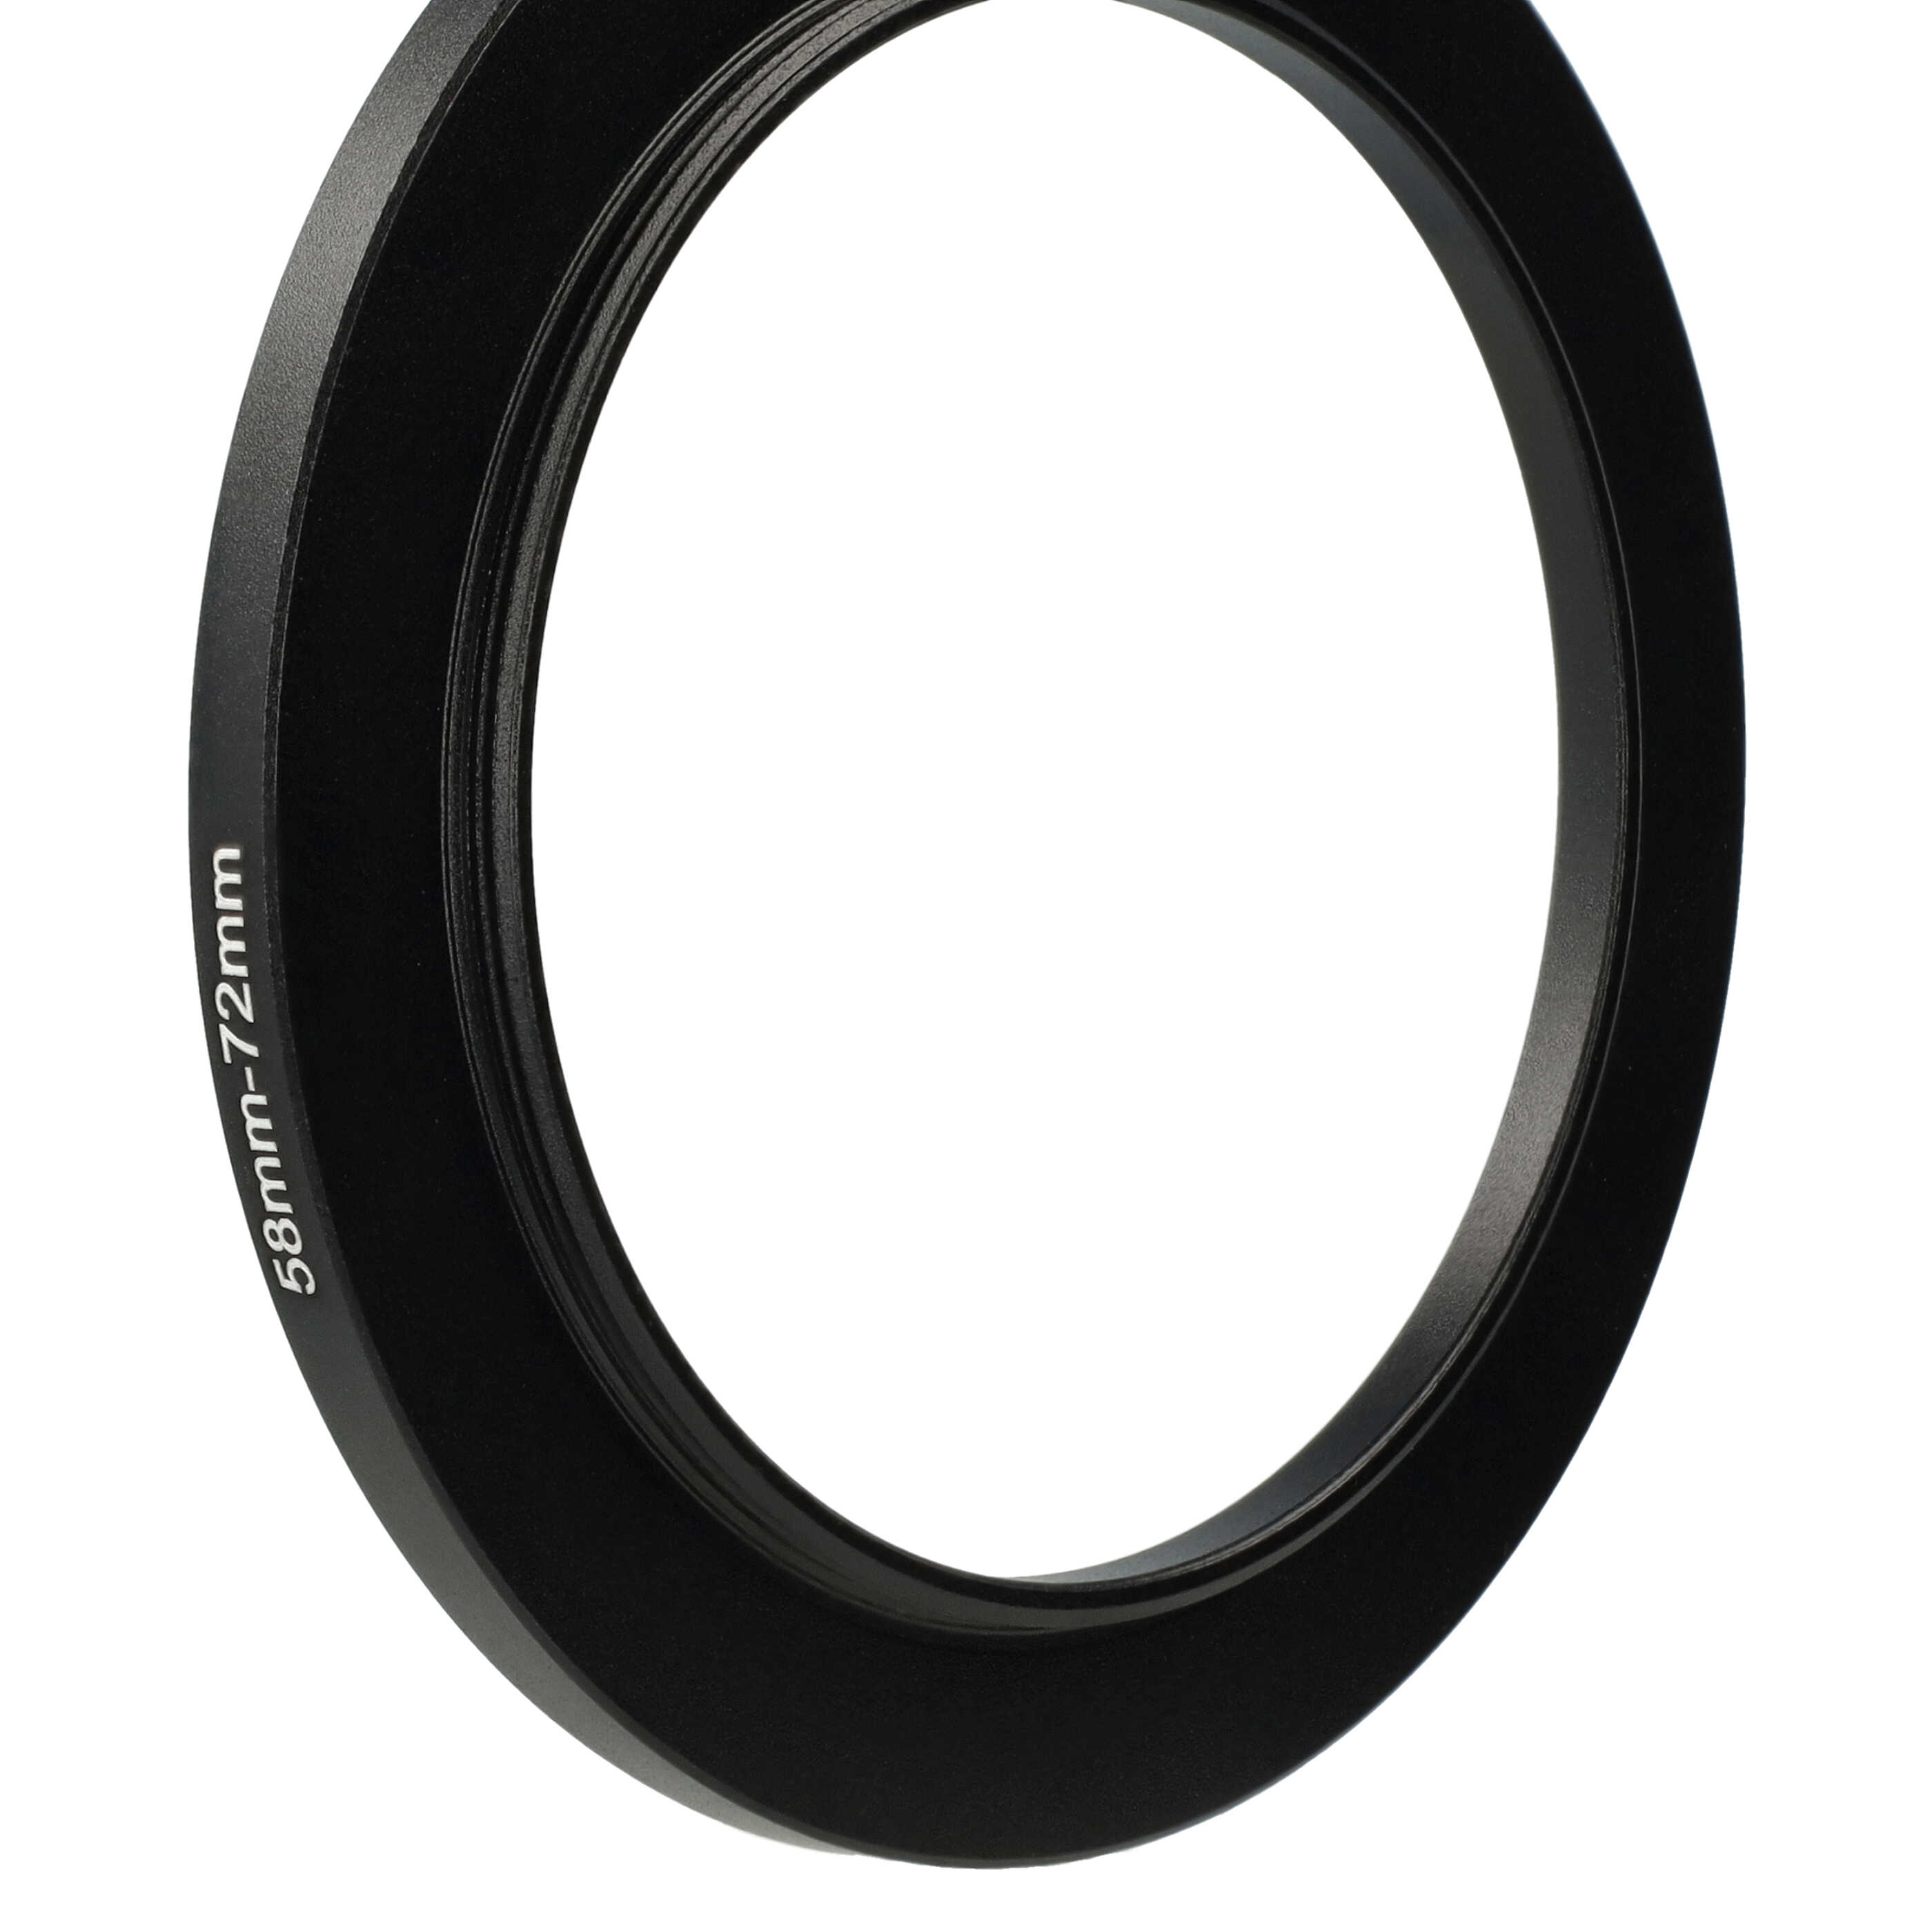 Step-Up Ring Adapter of 58 mm to 72 mmfor various Camera Lens - Filter Adapter